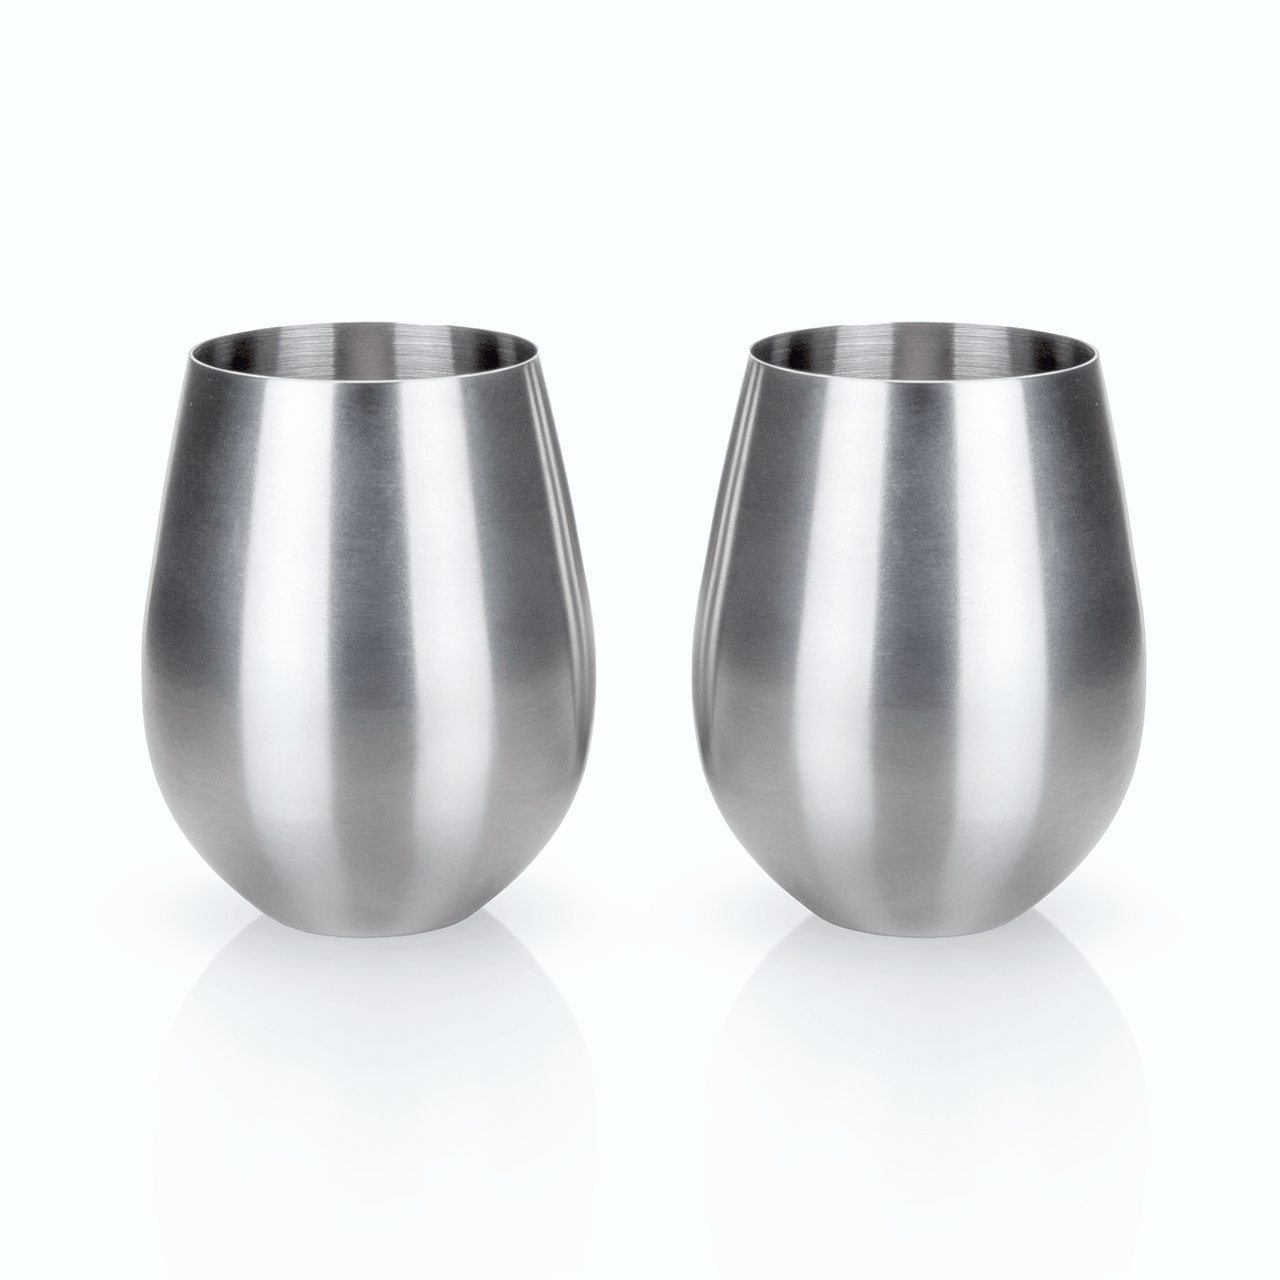 https://cdn10.bigcommerce.com/s-9dzfgkp0th/products/1652/images/1990/Viski-Admiral-Stainless-Steel-Stemless-Wine-Glasses-James-Anthony-Collection__86674.1502202551.1280.1280.png?c=2